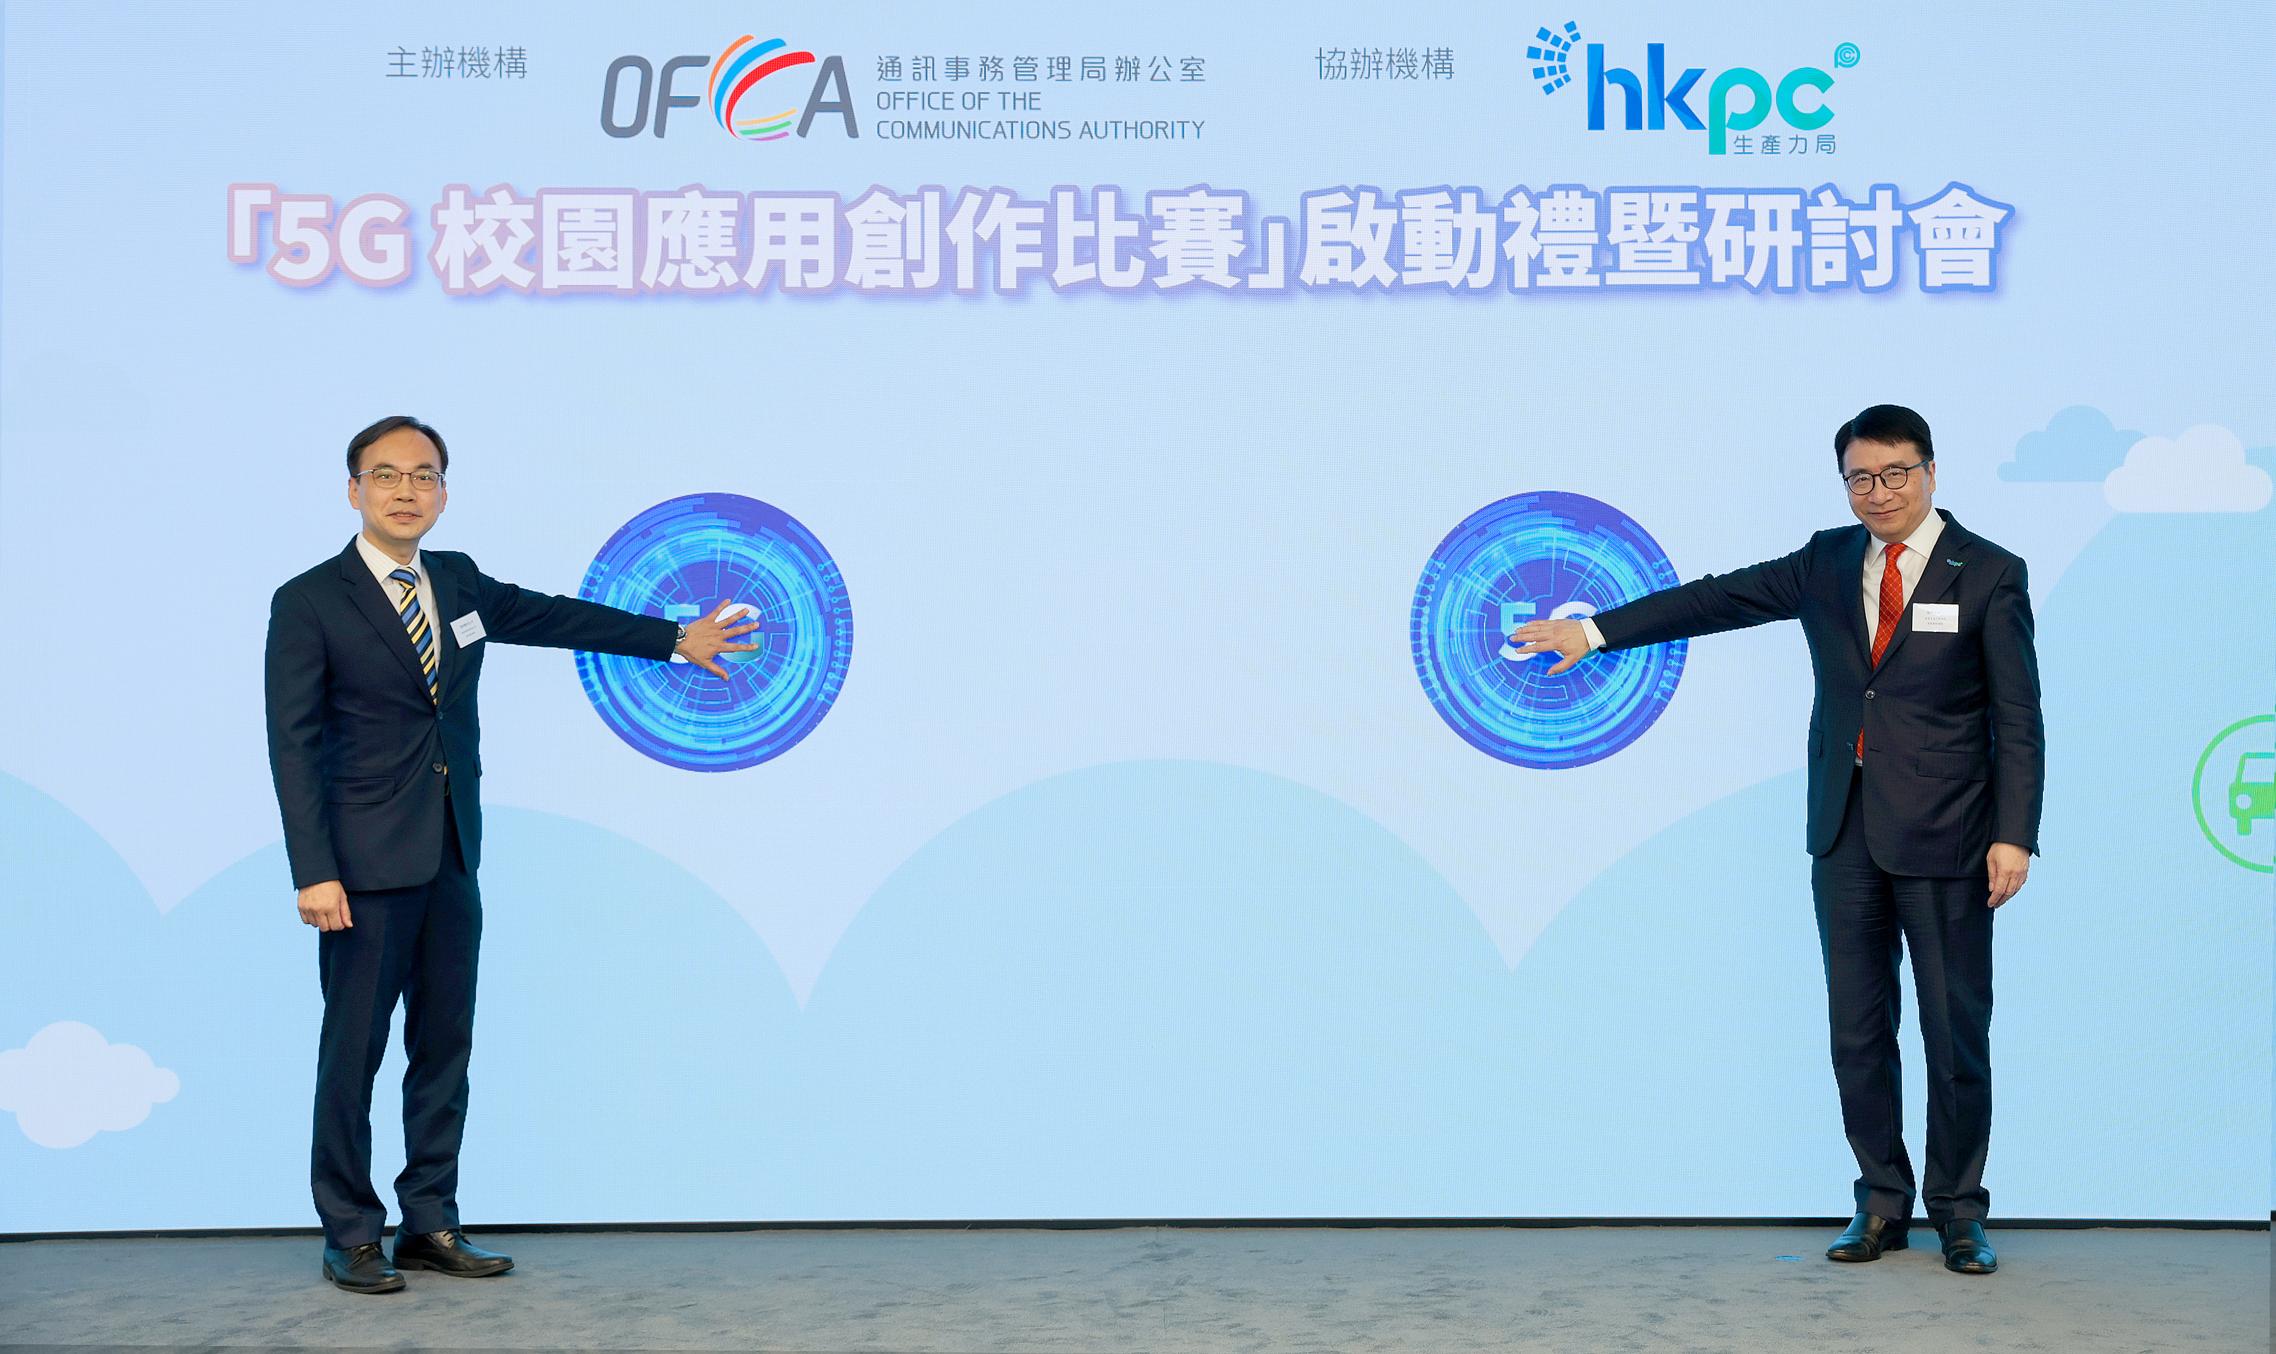 The Office of the Communications Authority held the Kick-off Seminar of the "5G Campus Application Competition" today (May 20). Photo shows the Director-General of Communications, Mr Chaucer Leung (left), and the Chief Innovation Officer of the Hong Kong Productivity Council, Dr Lawrence Cheung (right), officiating at the launching ceremony.